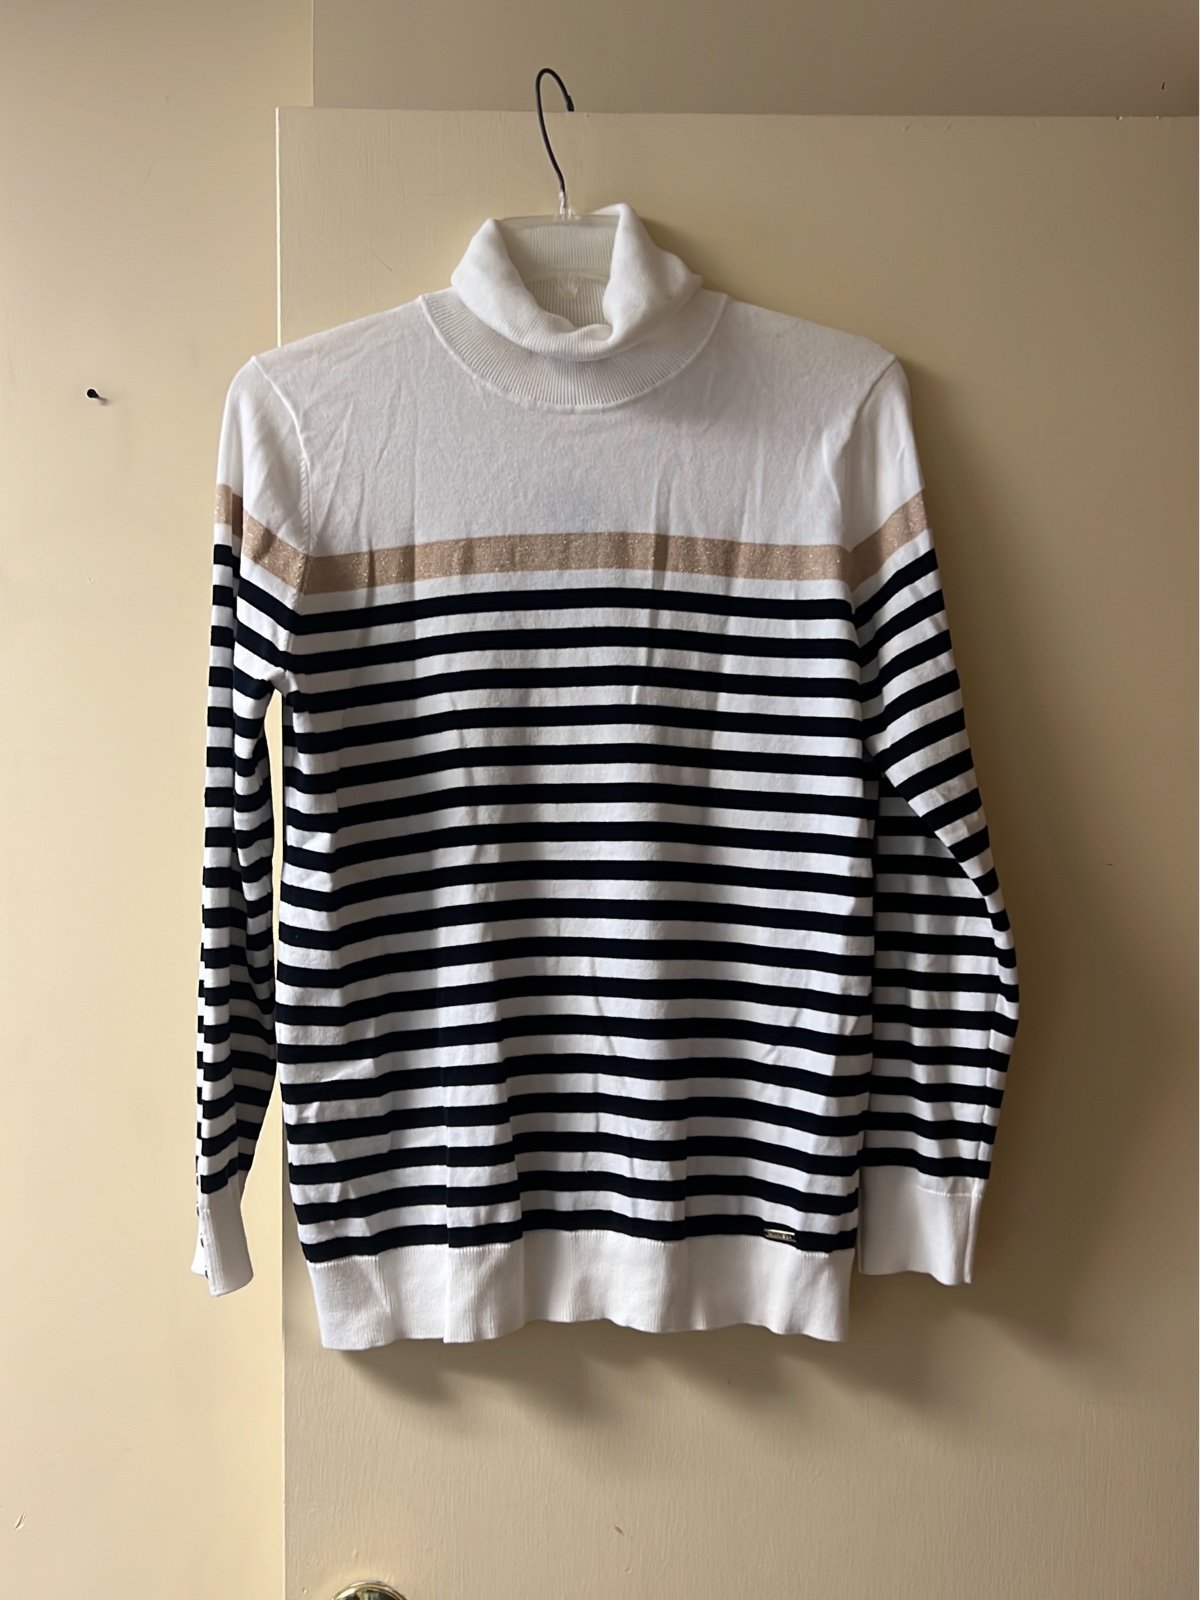 save up to 70% Tommy Hilfiger Sweater XL MON5pD920 Great